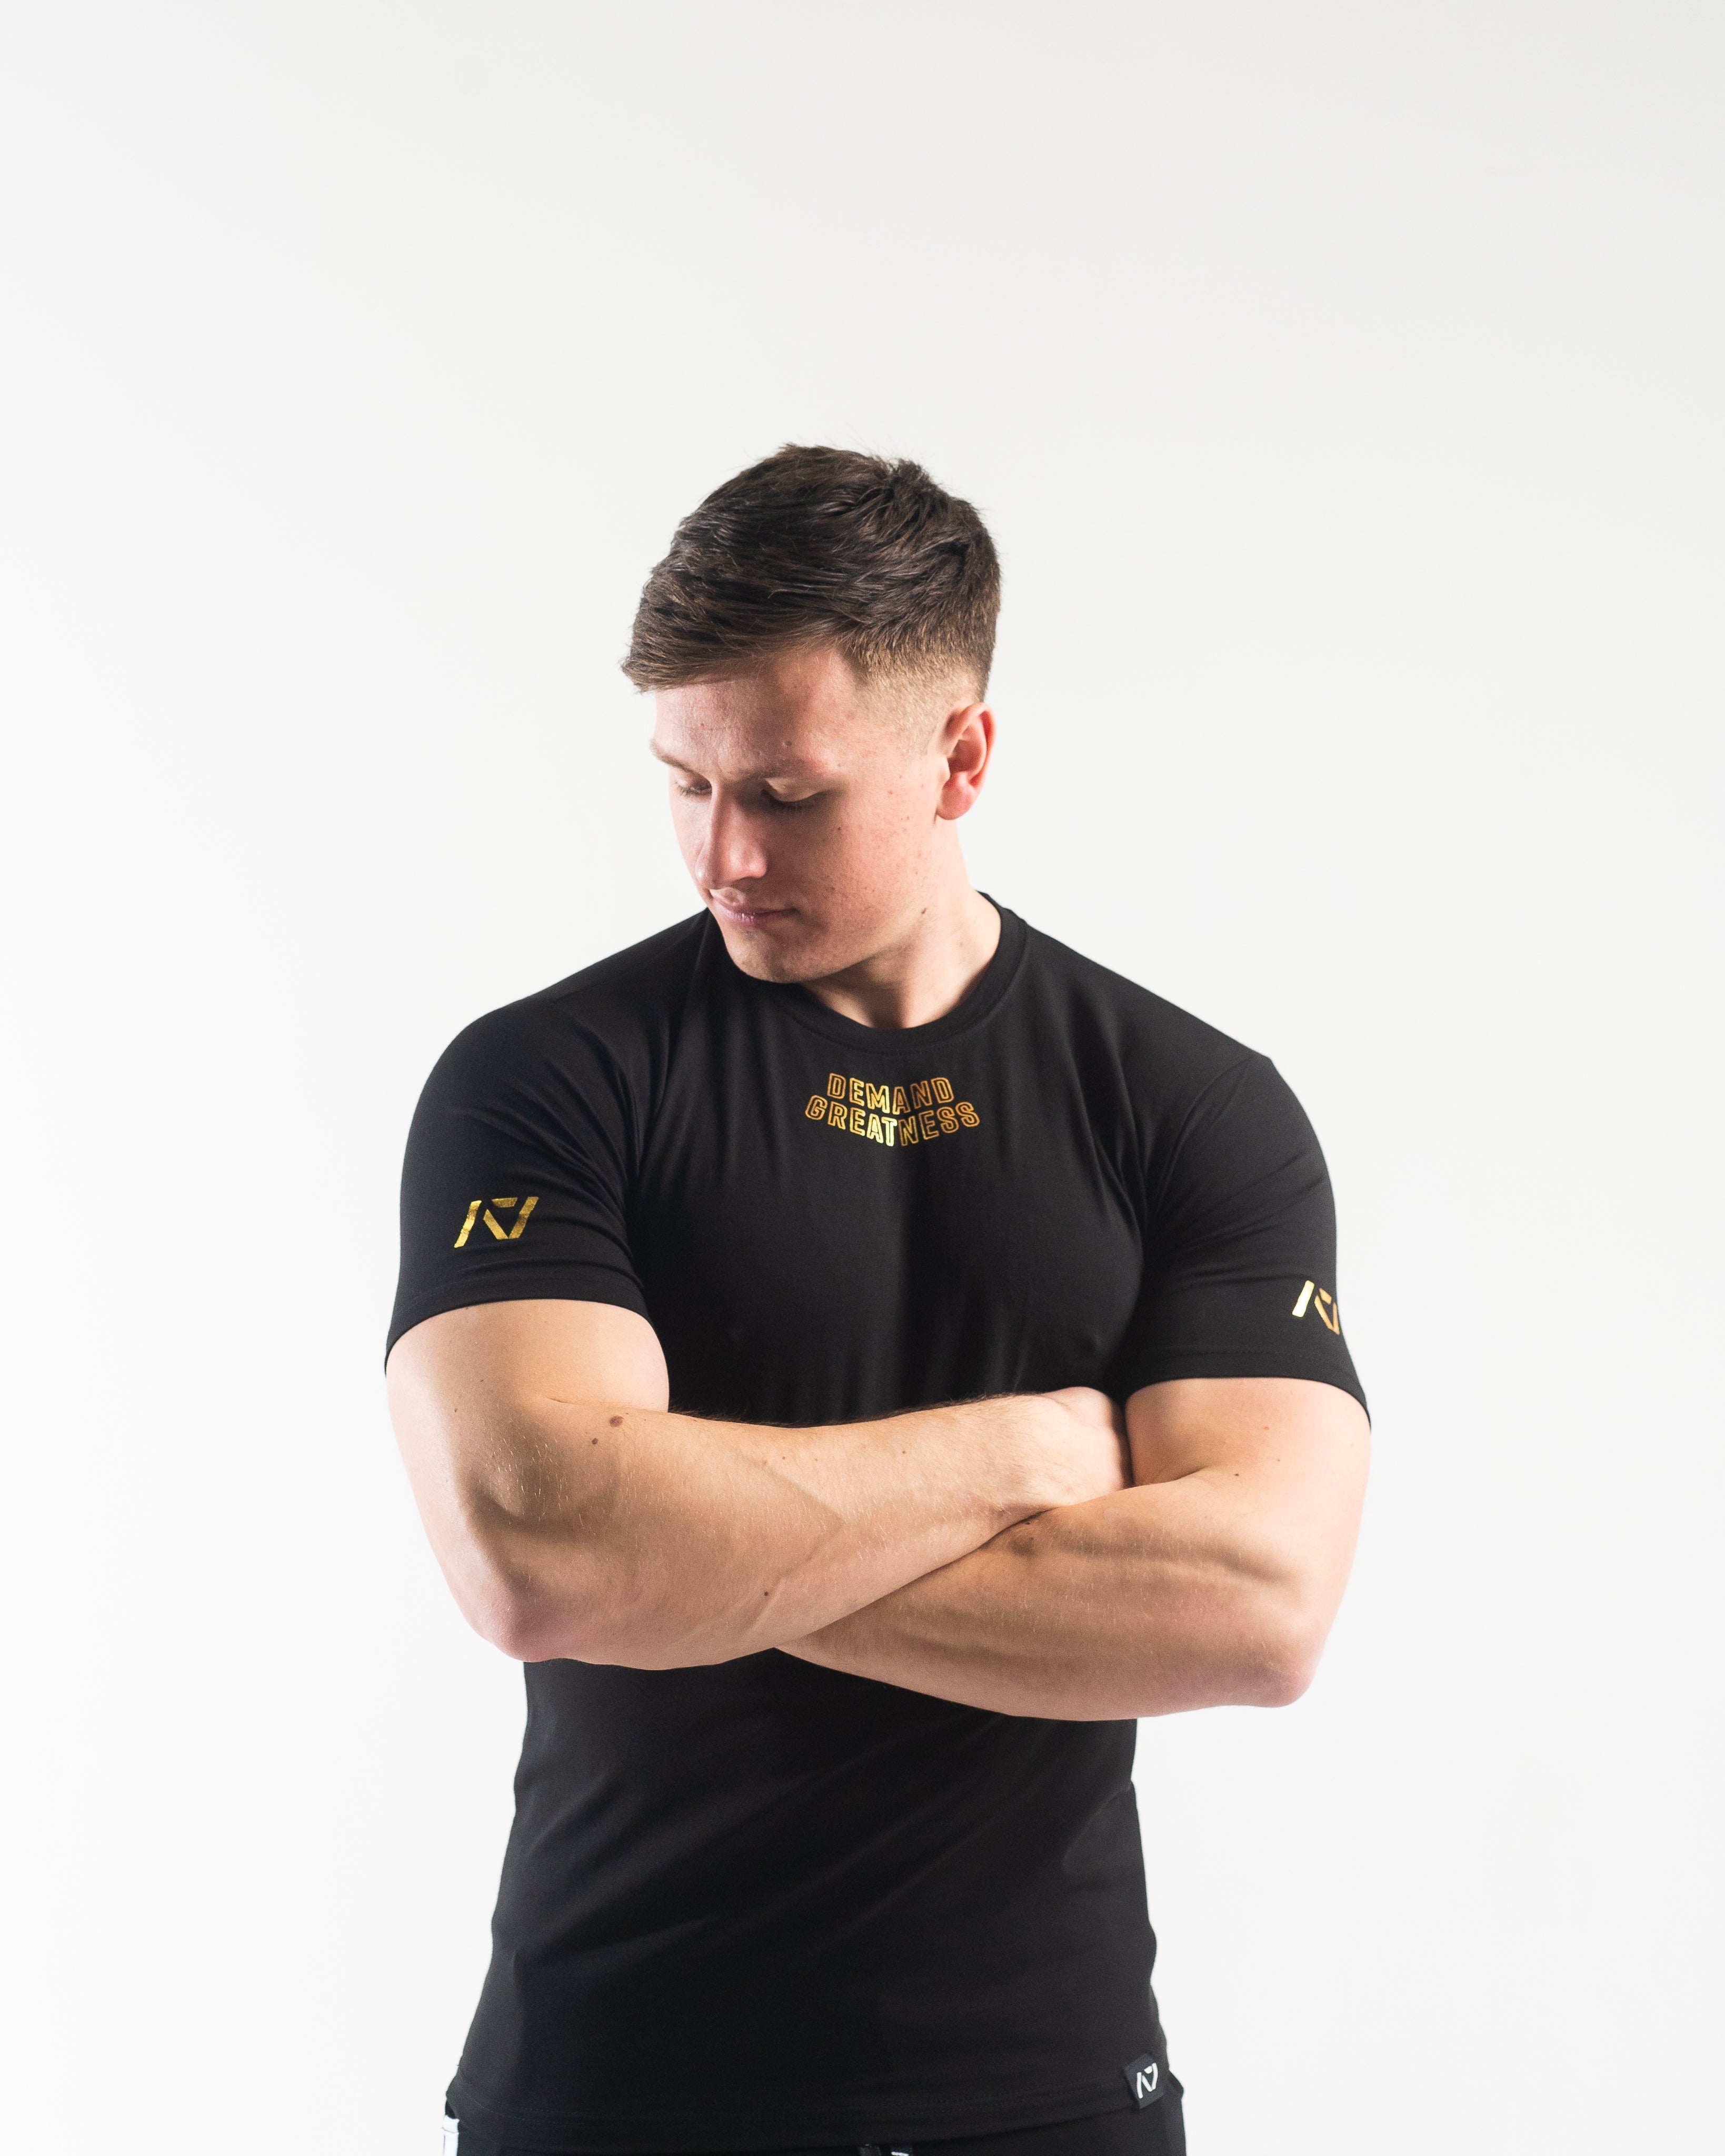 DG23 IPF Approved Meet Shirt Gold Standard is our new meet shirt with Demand Greatness with a double outline font to showcase your impact on the platform. Shop the full A7 Powerlifting IPF Approved Equipment collection including Powerlifting Singlet, A7 Meet Shirt, A7 Zebra Wrist Wraps, A7 Deadlift Socks, Hourglass Knee Sleeves (Stiff Knee Sleeves and Rigor Mortis Knee Sleeves). PAL Lever is now IPF Approved. Genouillères powerlifting shipping to France, Spain, Ireland, Germany, Italy, Sweden and EU. 